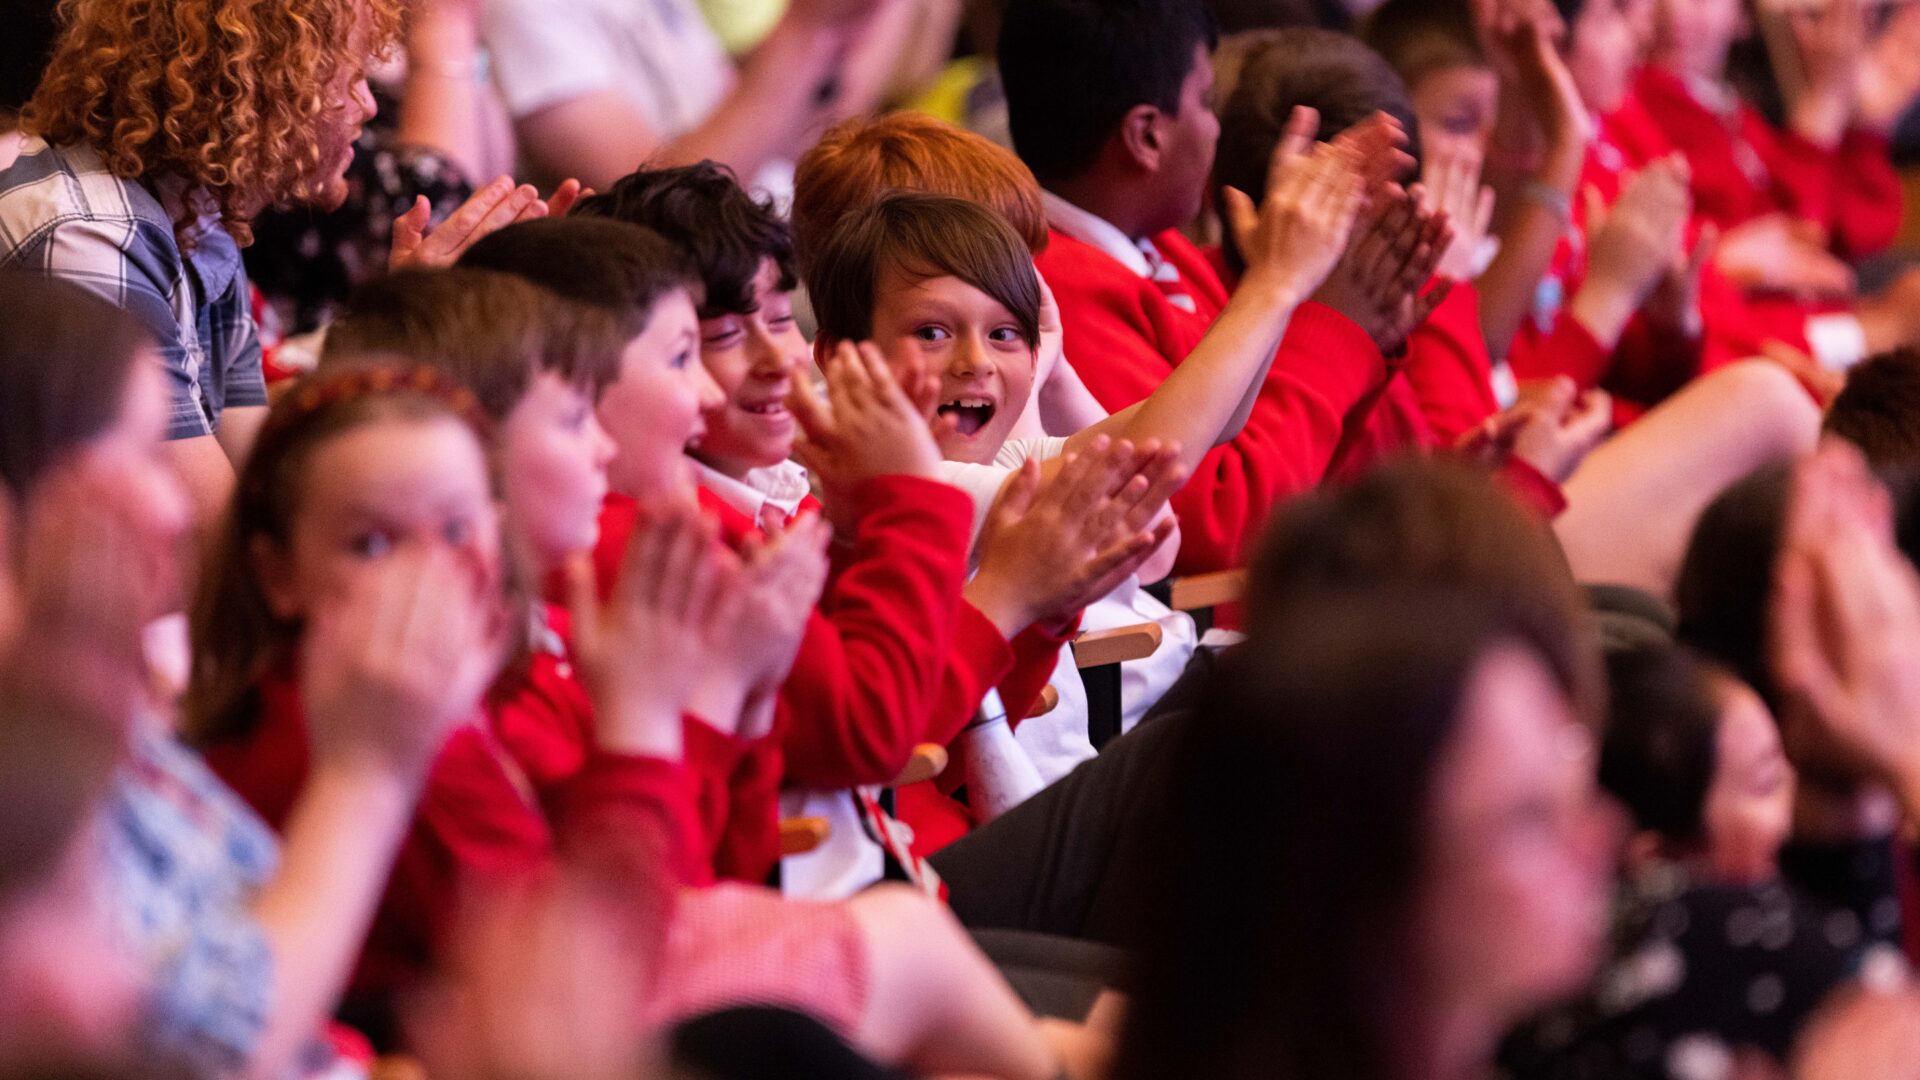 Shows children having fun at an orchestral concert. They are clapping hands and smiling.